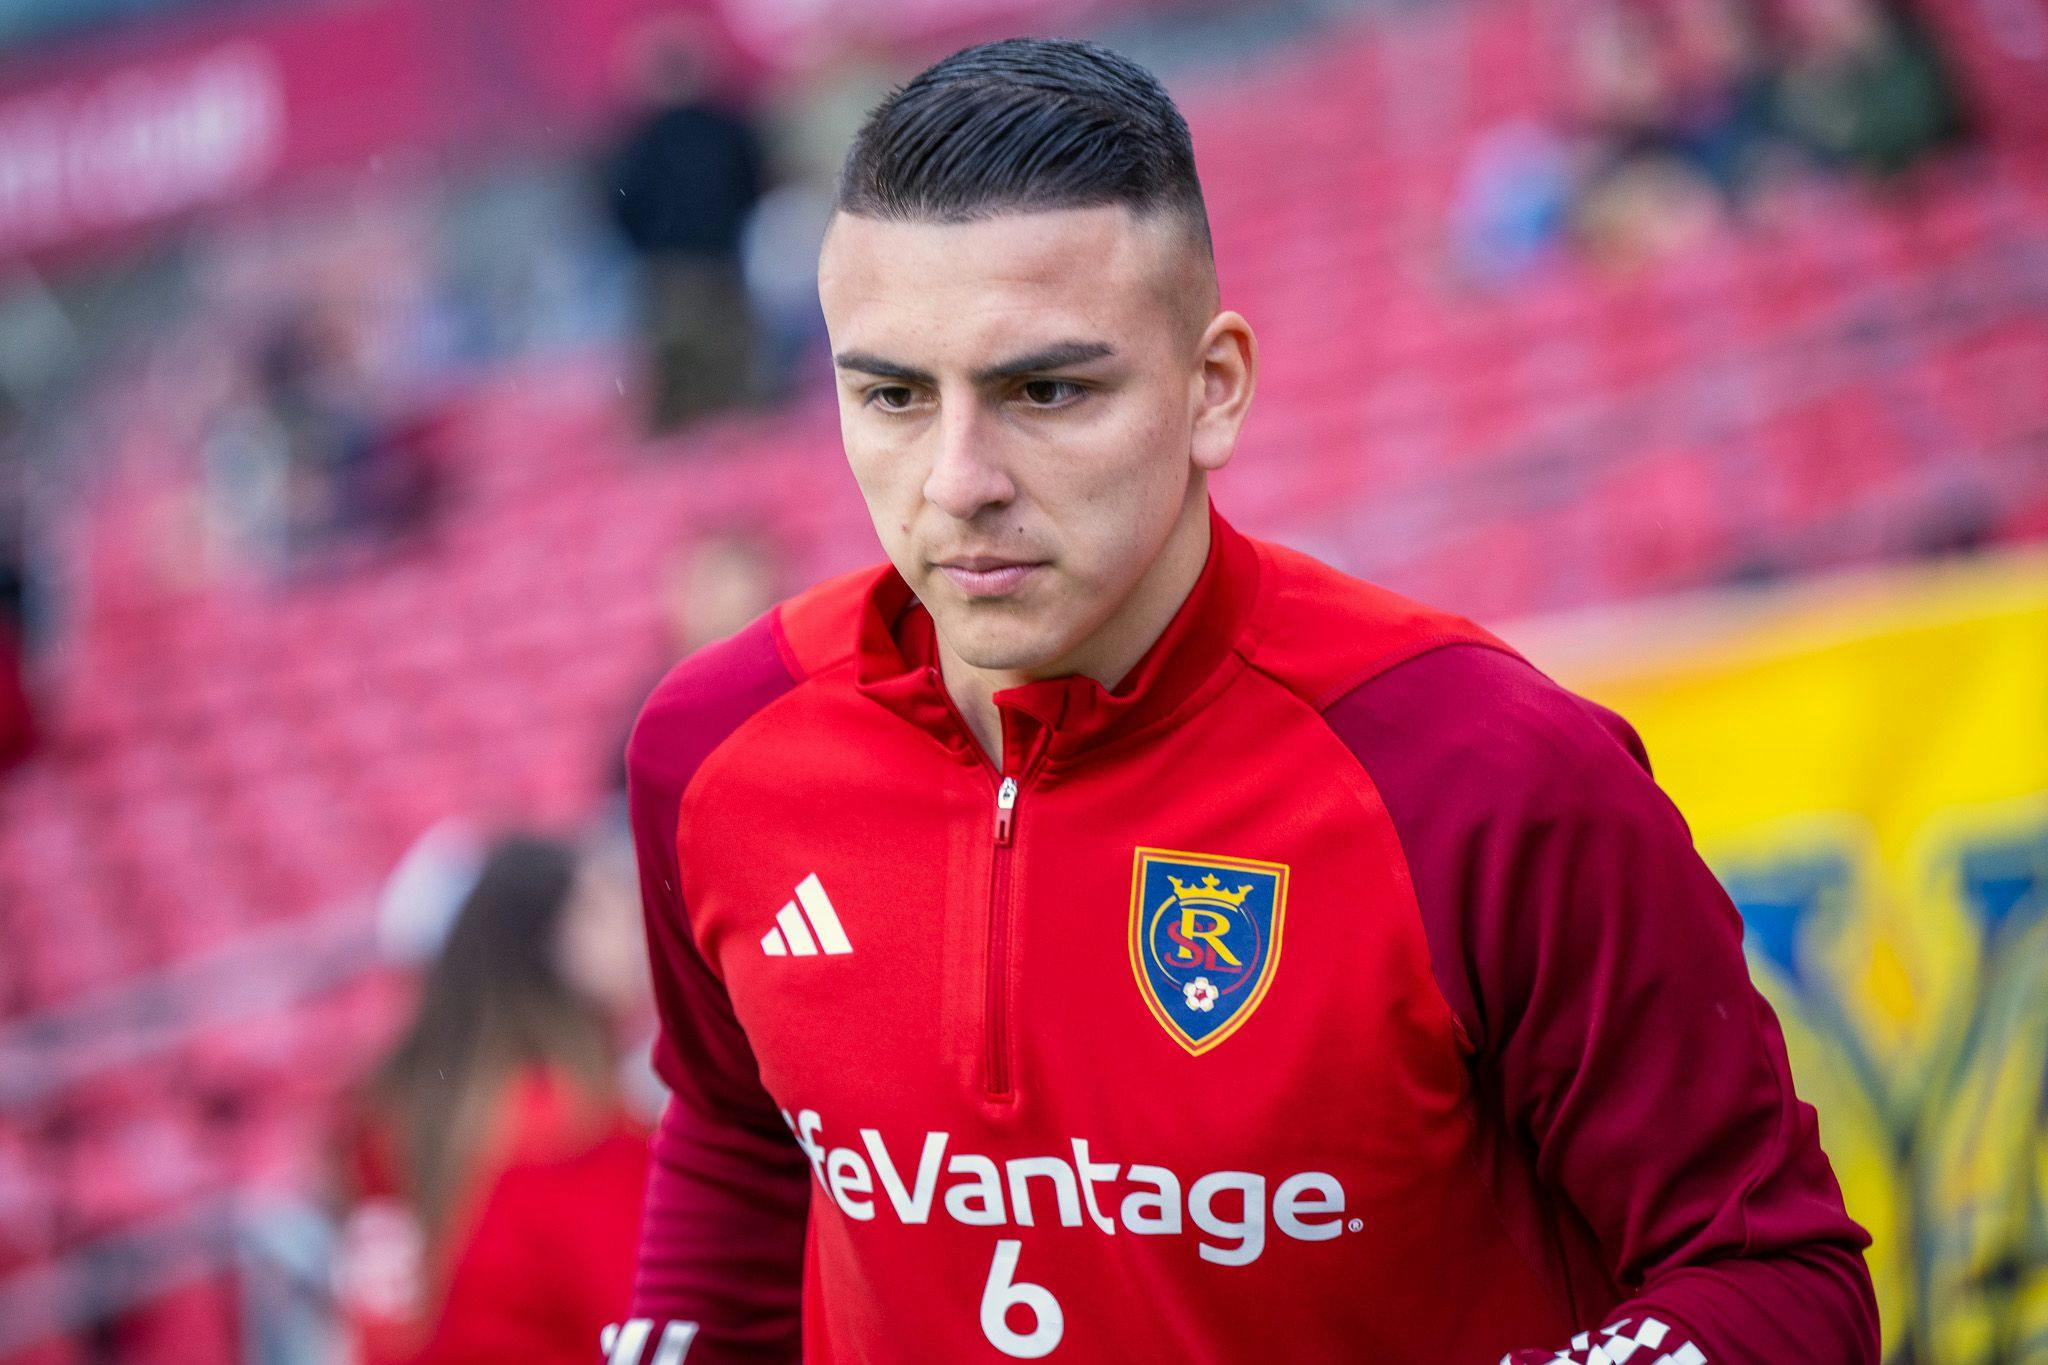 RSL buys Ojeda from Nottingham Forest